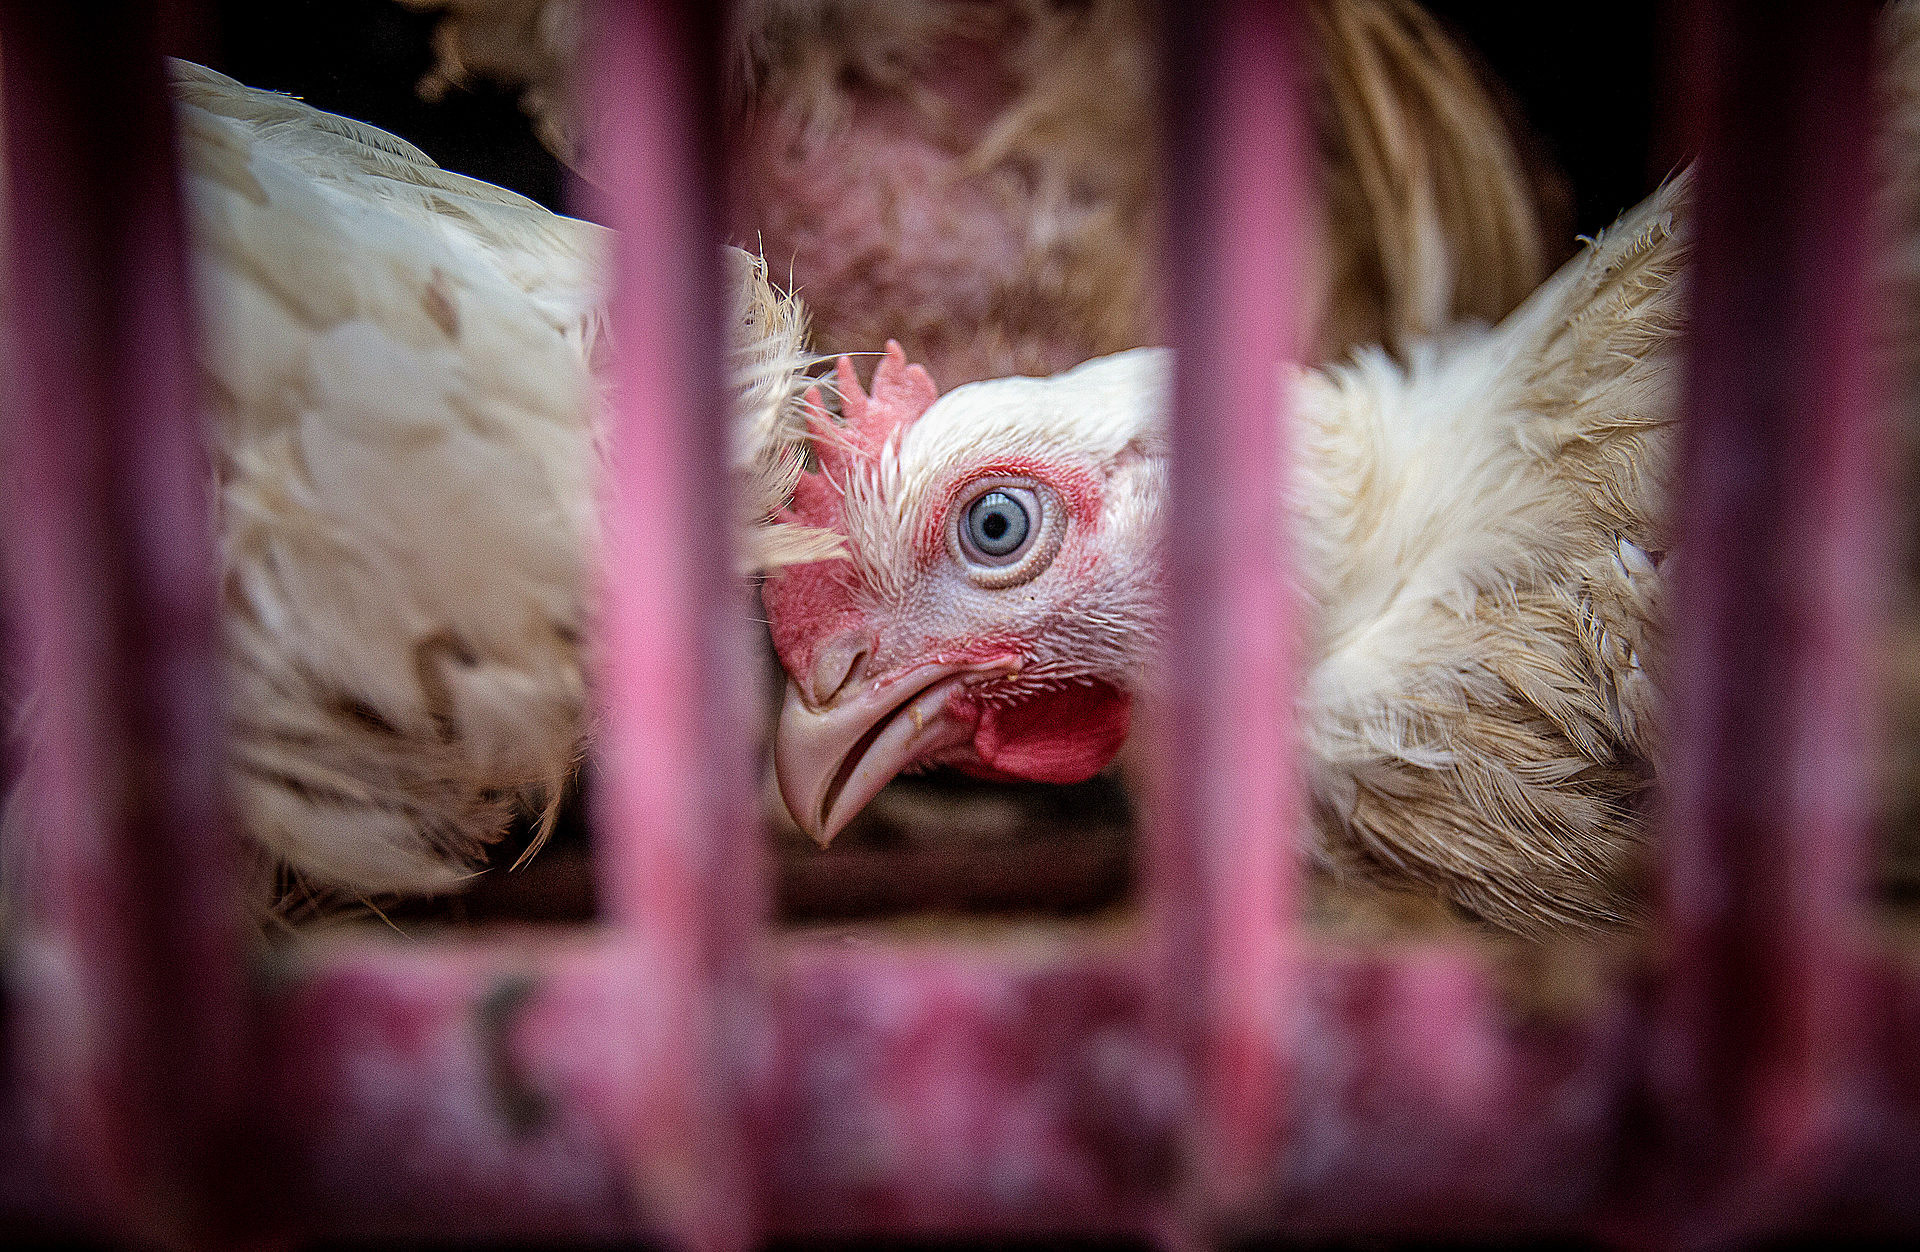 A chicken looks out from a crowded transport crate. Poland, 2016. Andrew Skowron / We Animals Media